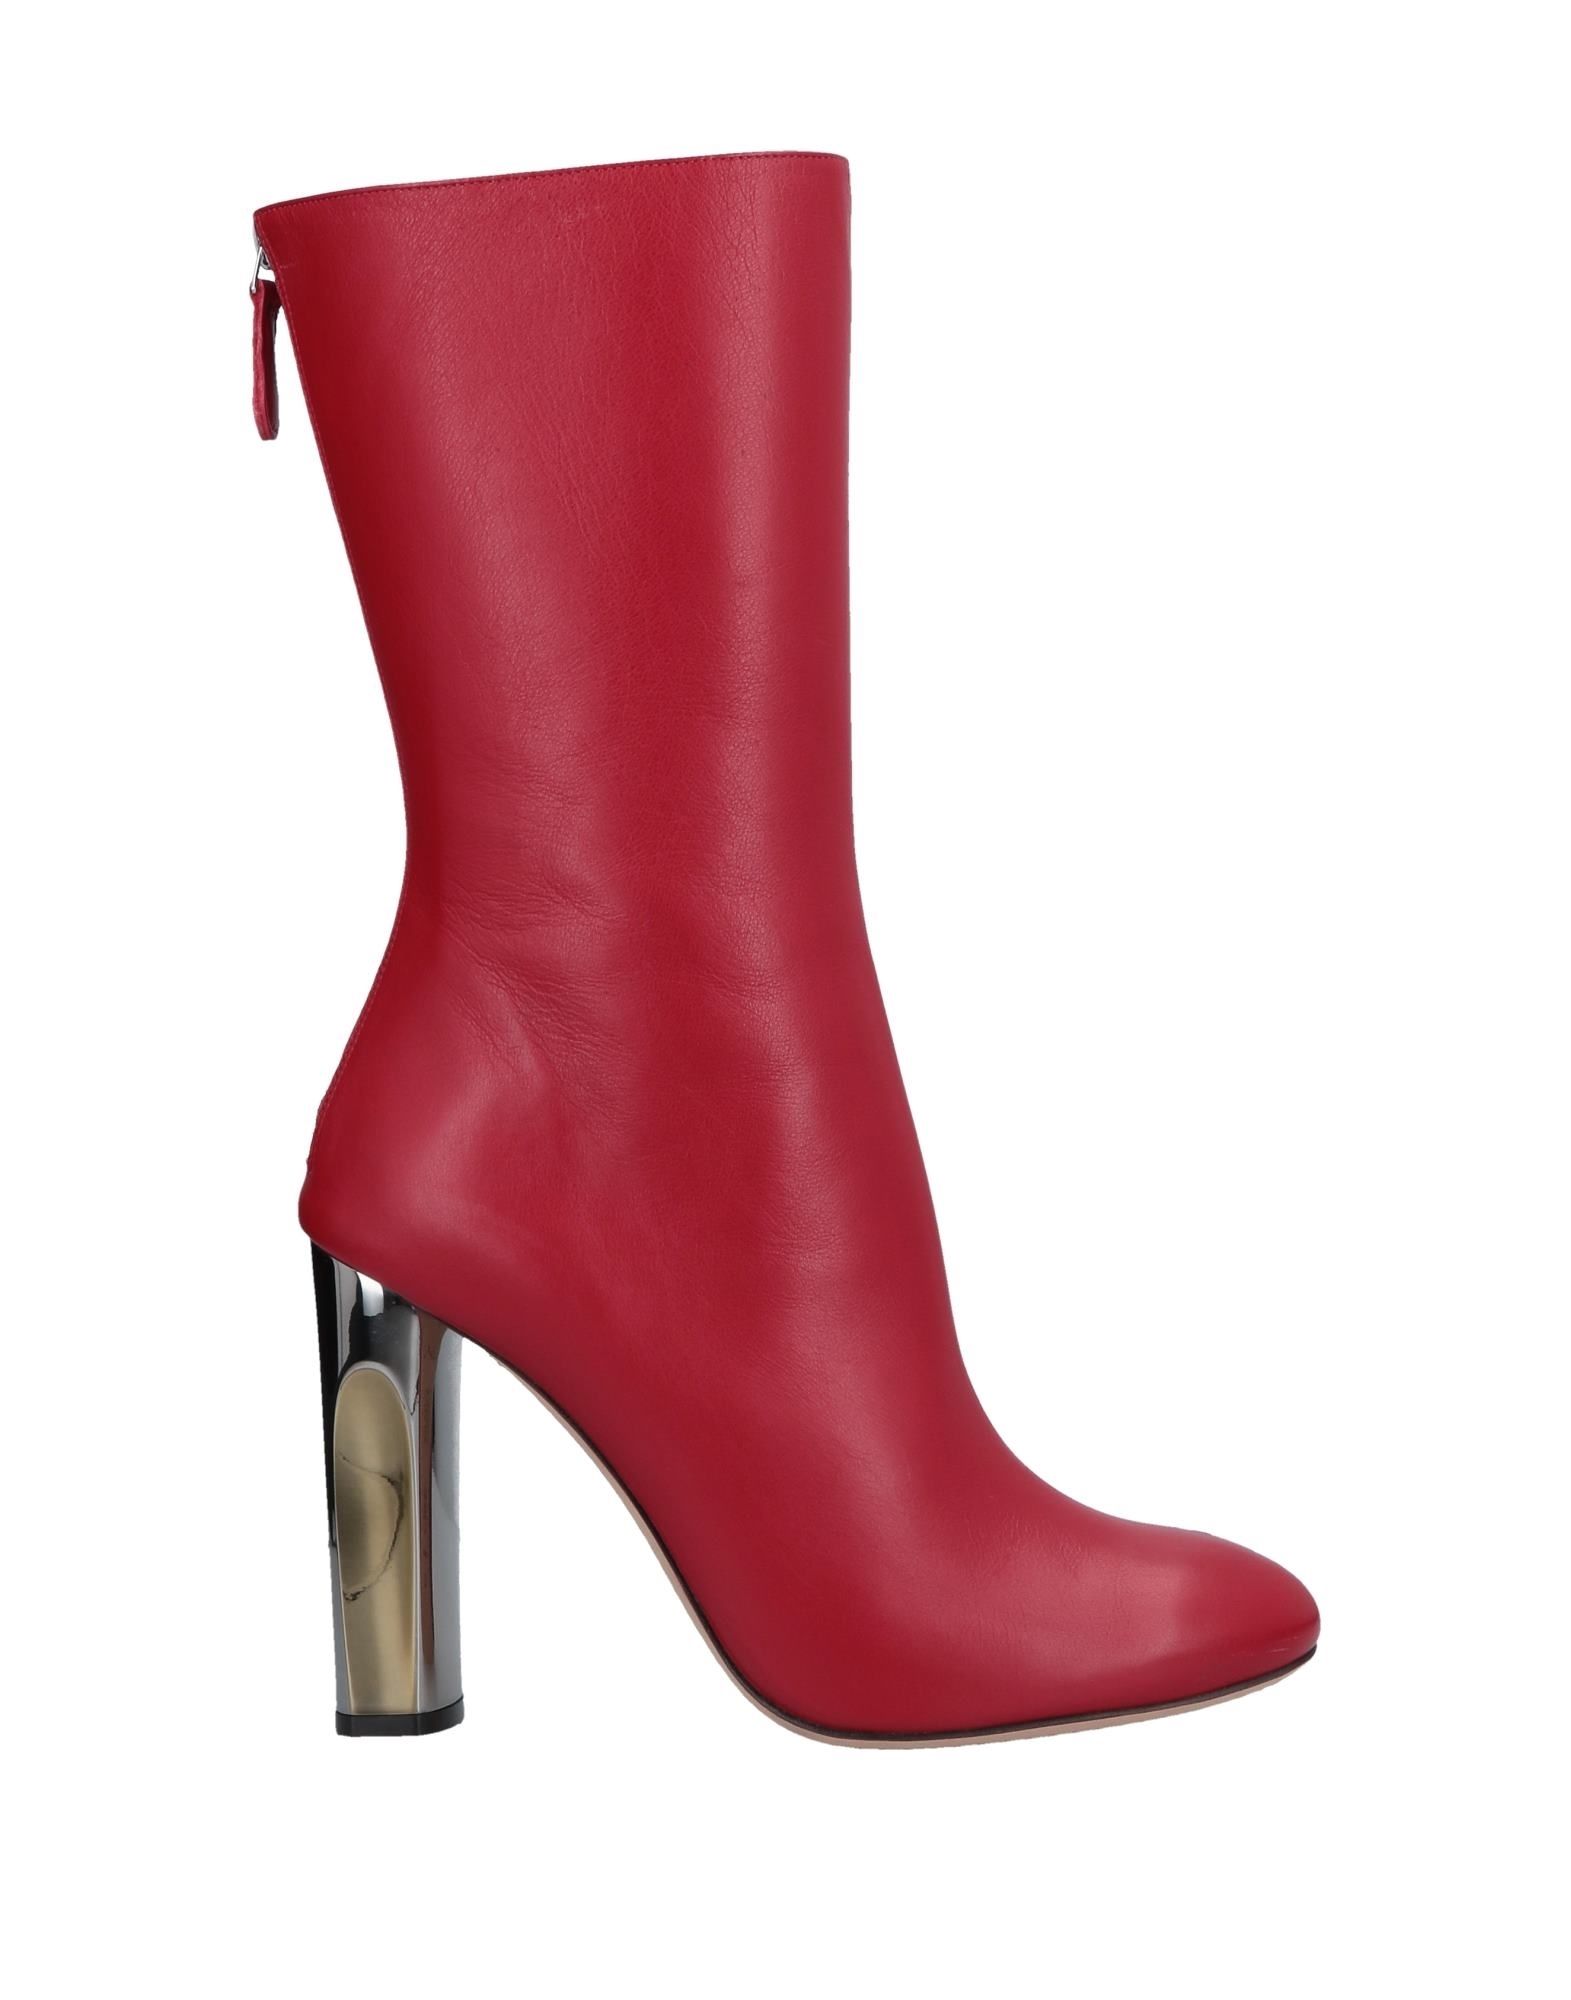 ALEXANDER MCQUEEN ALEXANDER MCQUEEN WOMAN ANKLE BOOTS RED SIZE 8 SOFT LEATHER,11660668HT 10